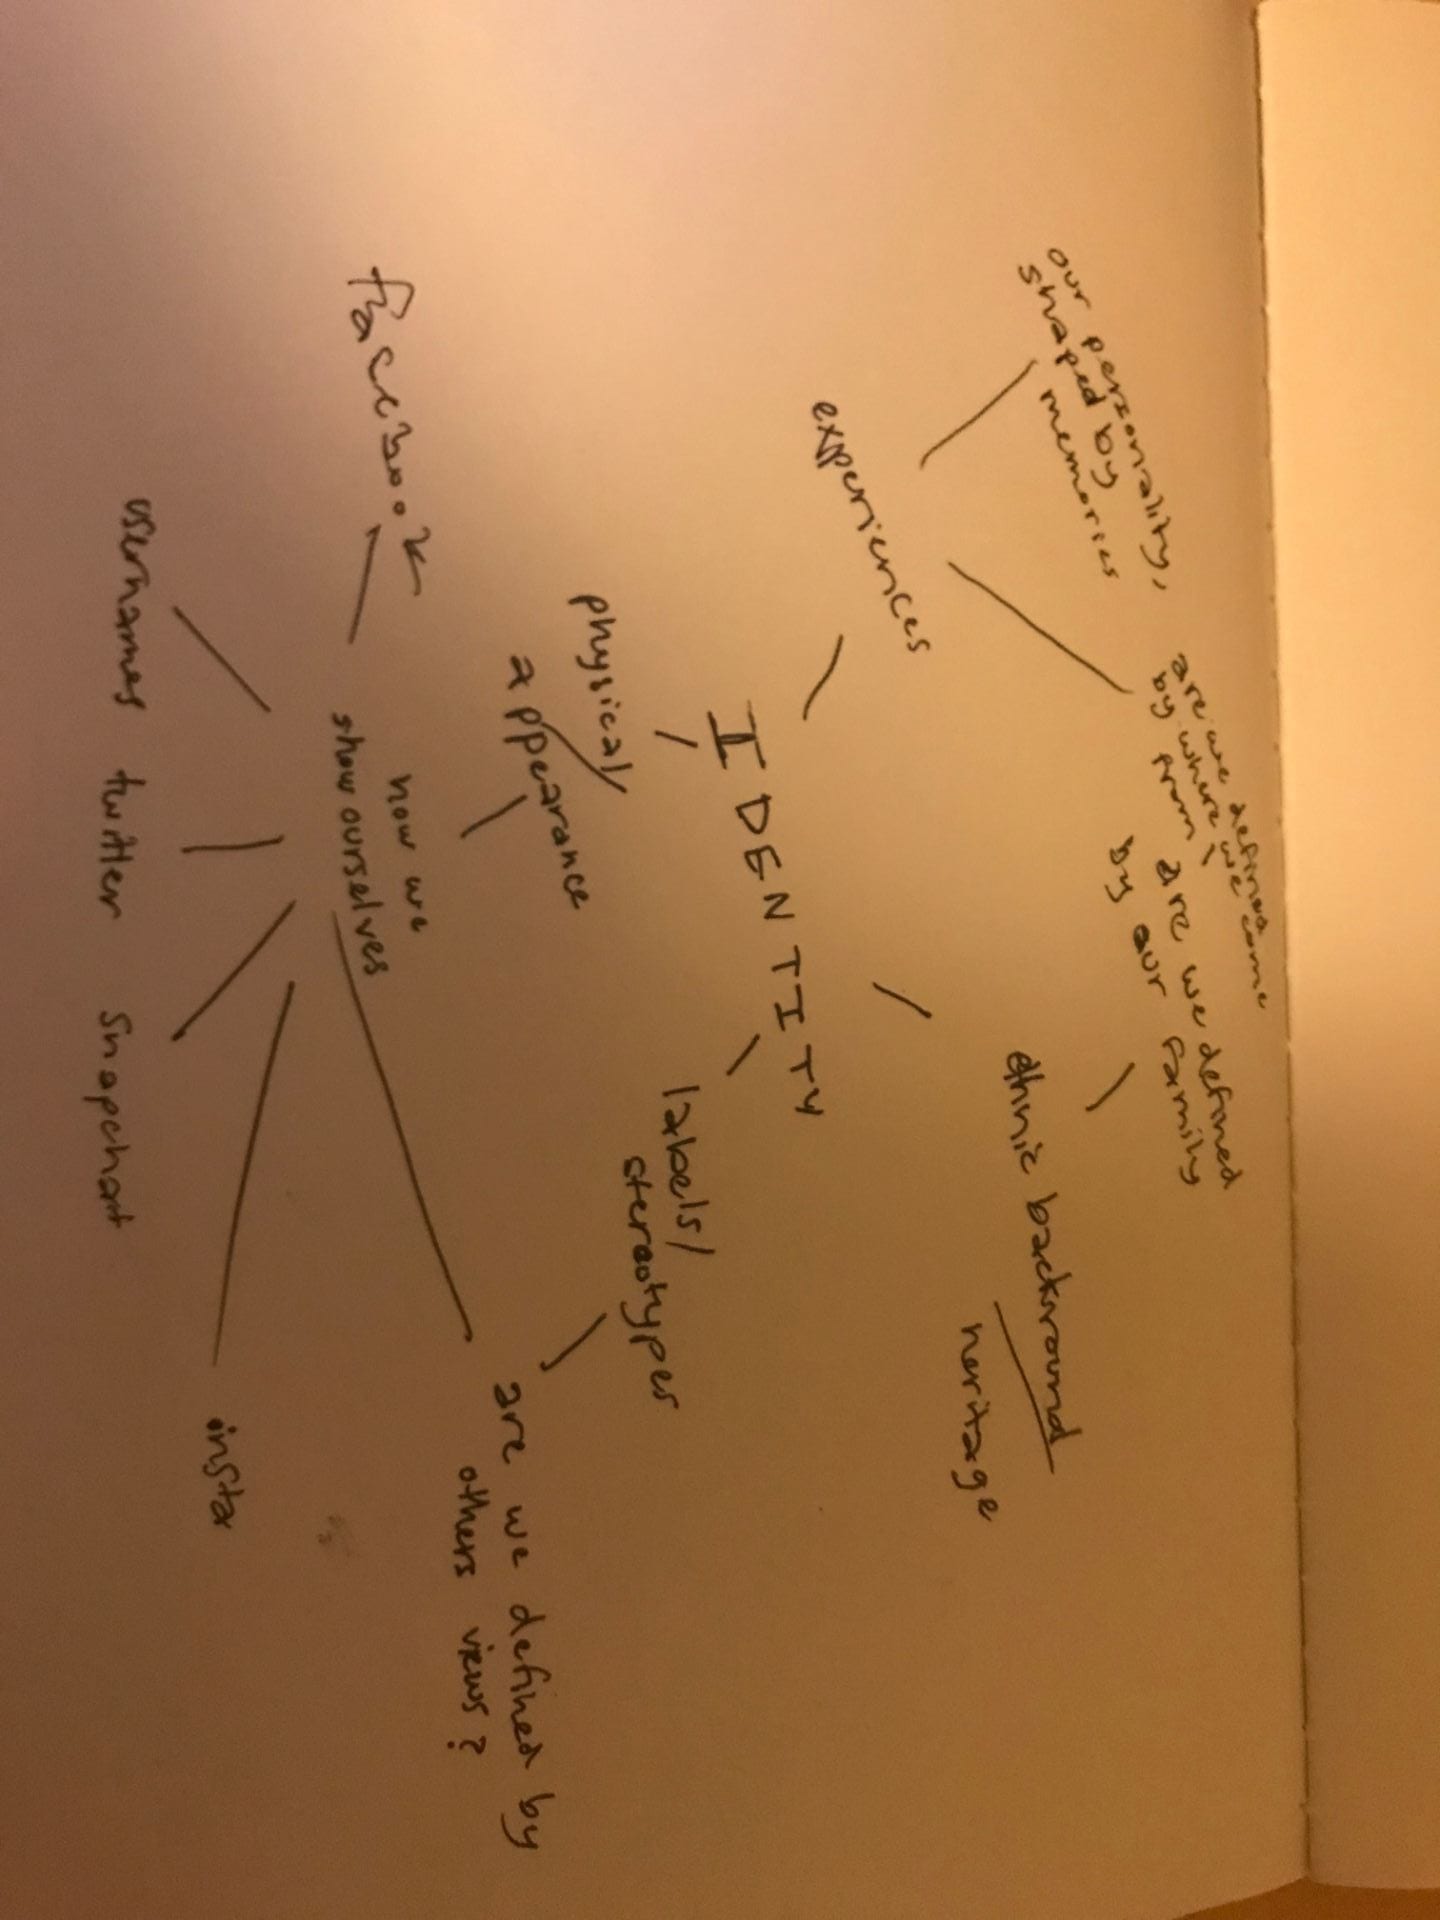 10 Questions + Mind Map